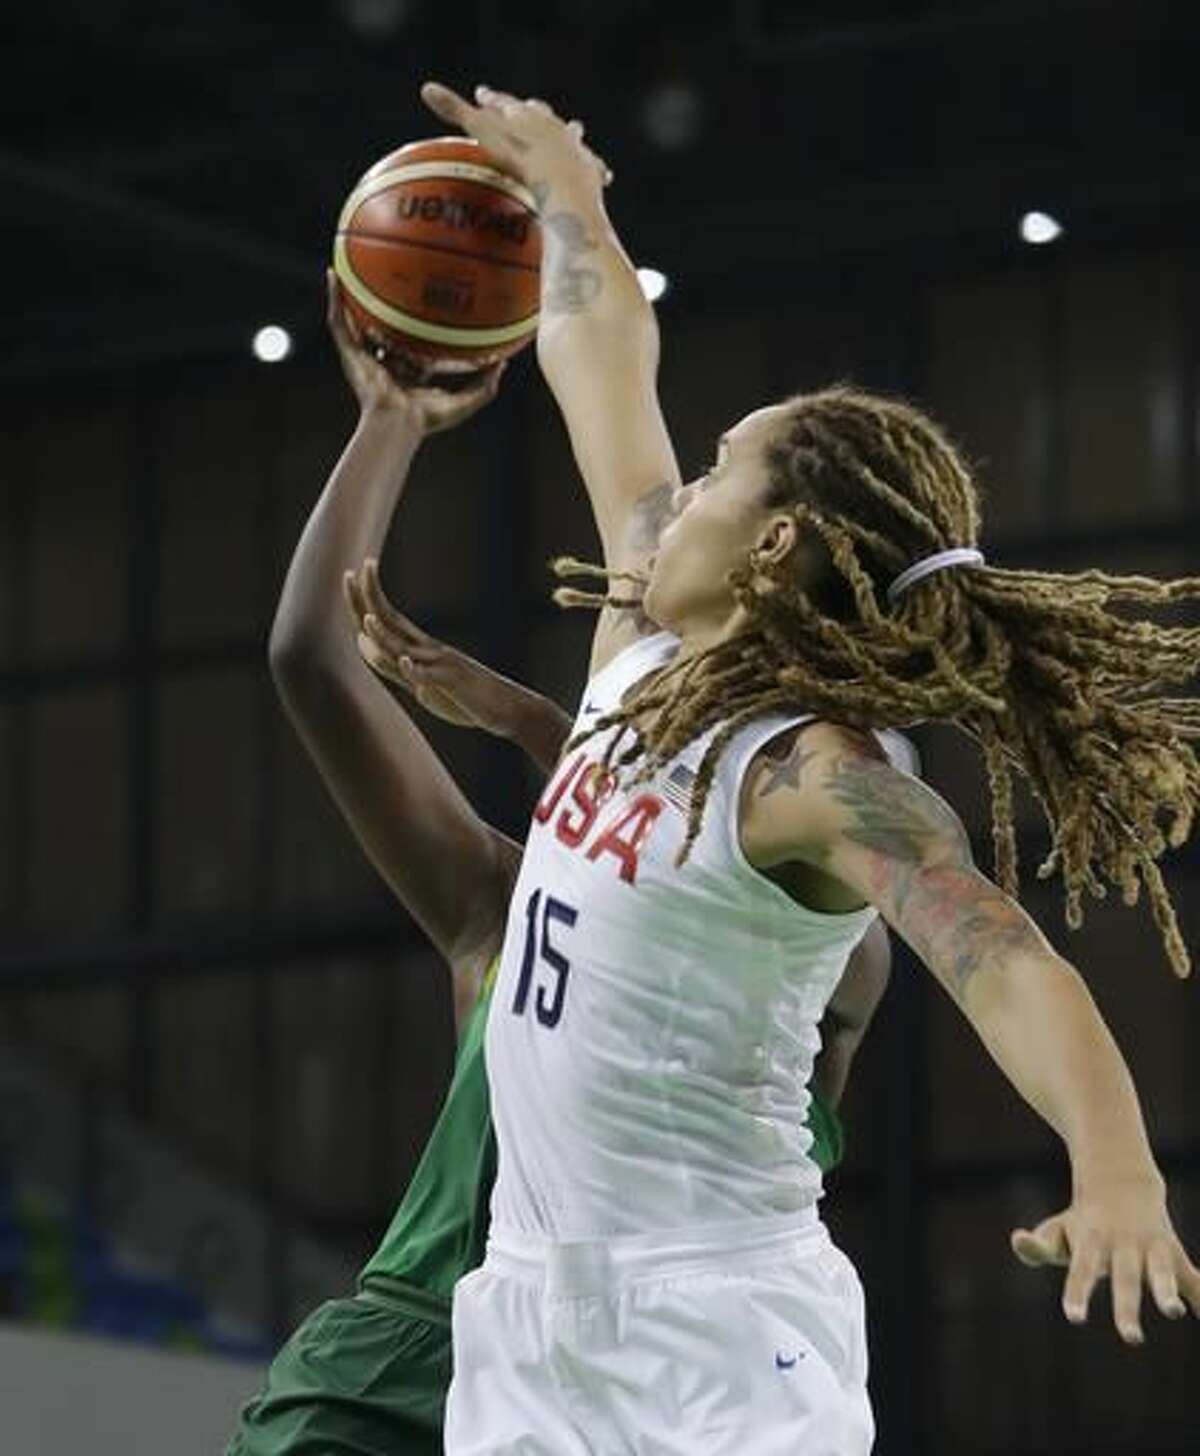 United States center Brittney Griner (15) blocks a shot by Senegal center Maimouna Diarra, during the first half of a women's basketball game at the Youth Center at the 2016 Summer Olympics in Rio de Janeiro, Brazil, Sunday, Aug. 7, 2016. (AP Photo/Carlos Osorio)